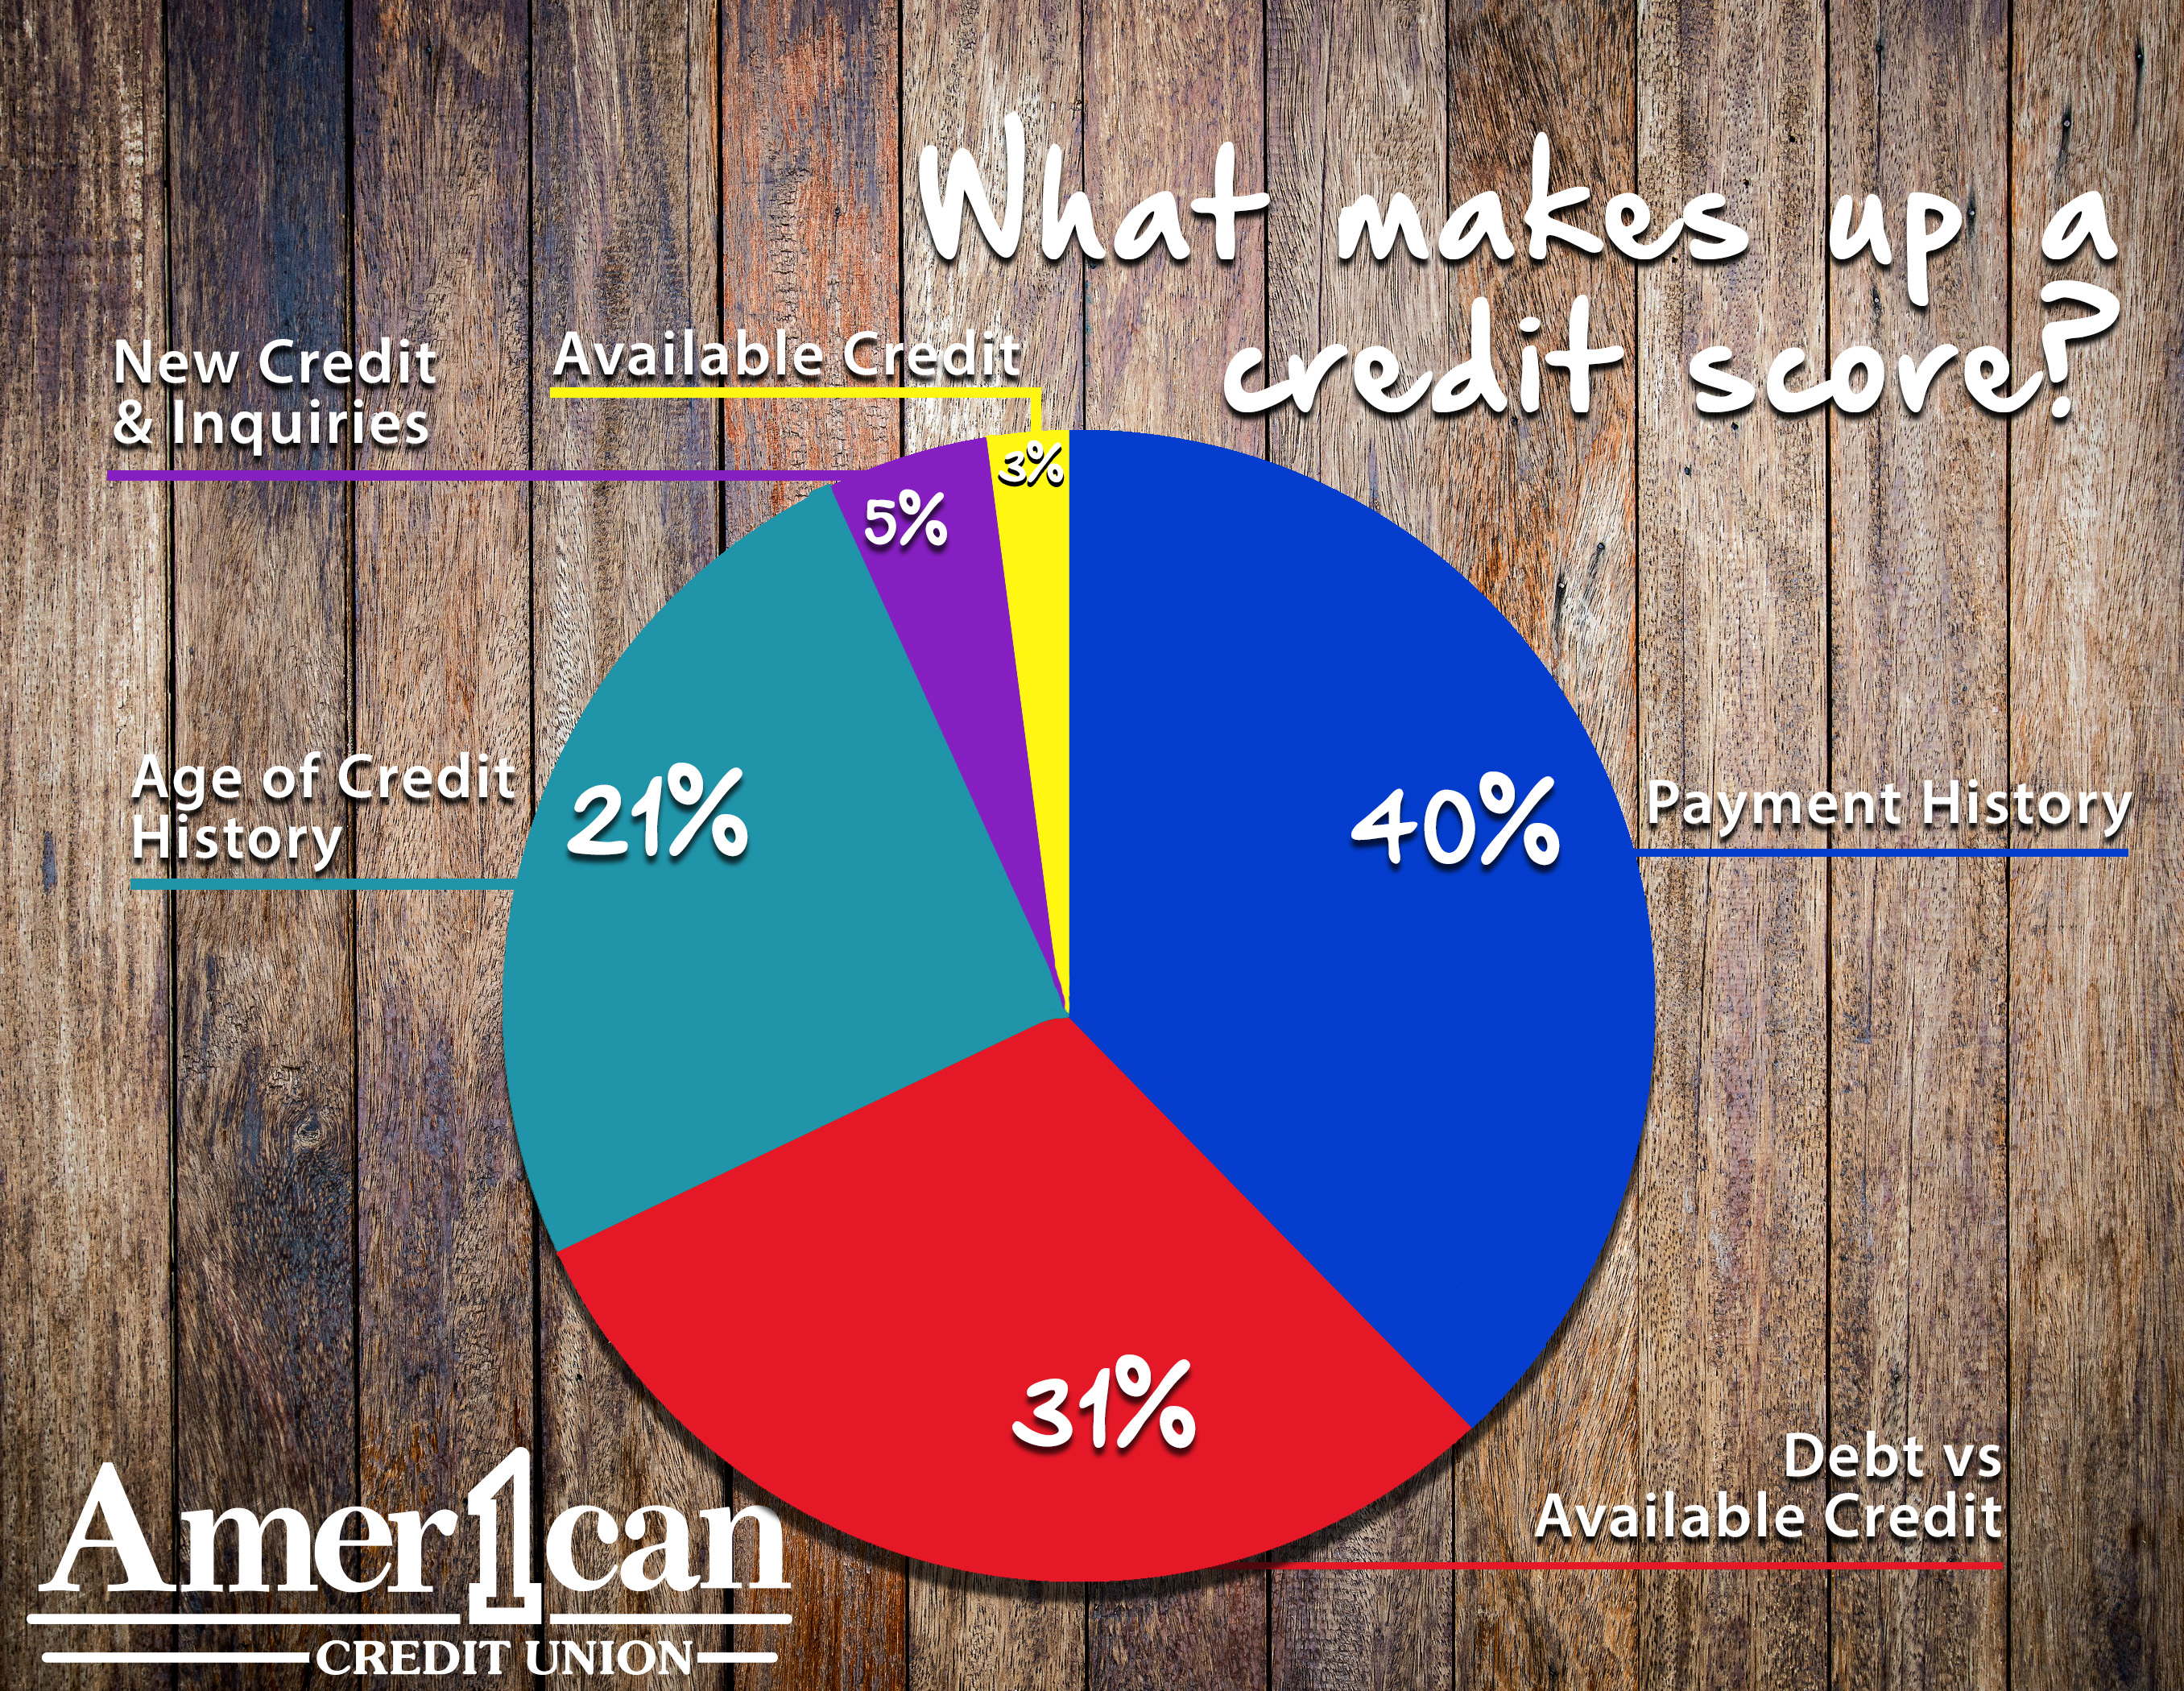 What Makes a Credit Score